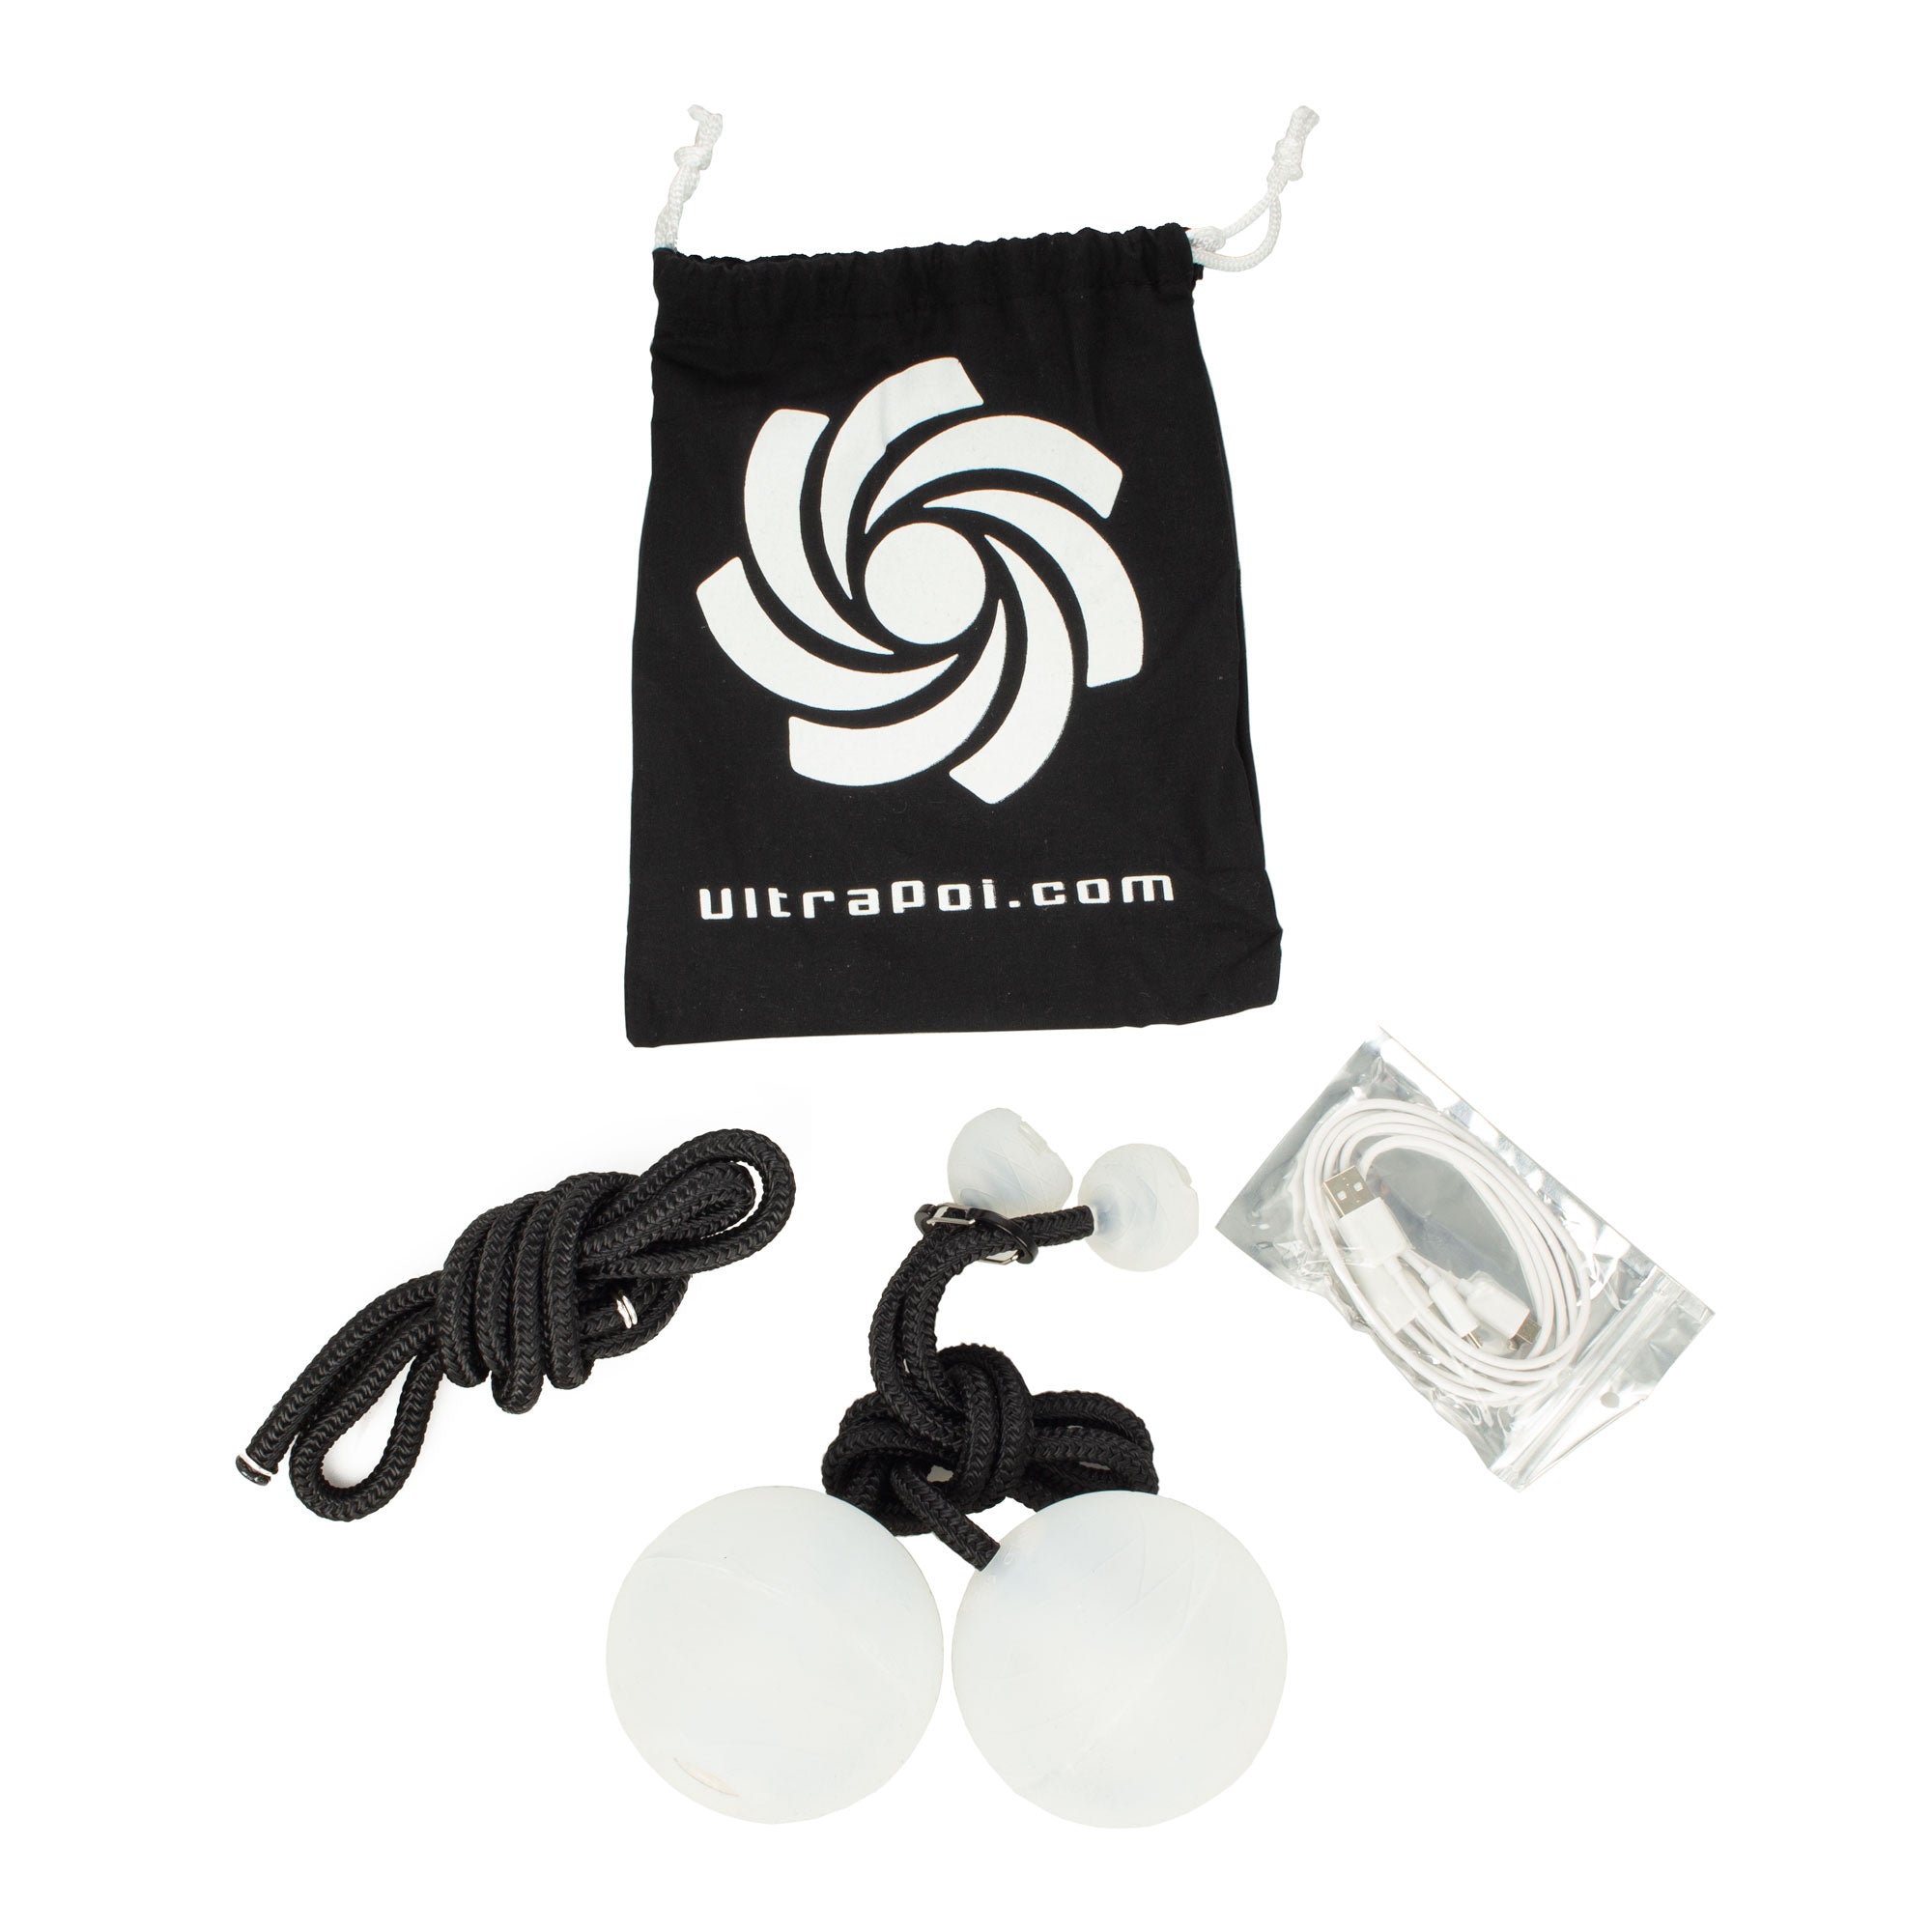 ultrapoi branded drawstring canvas bag and contents